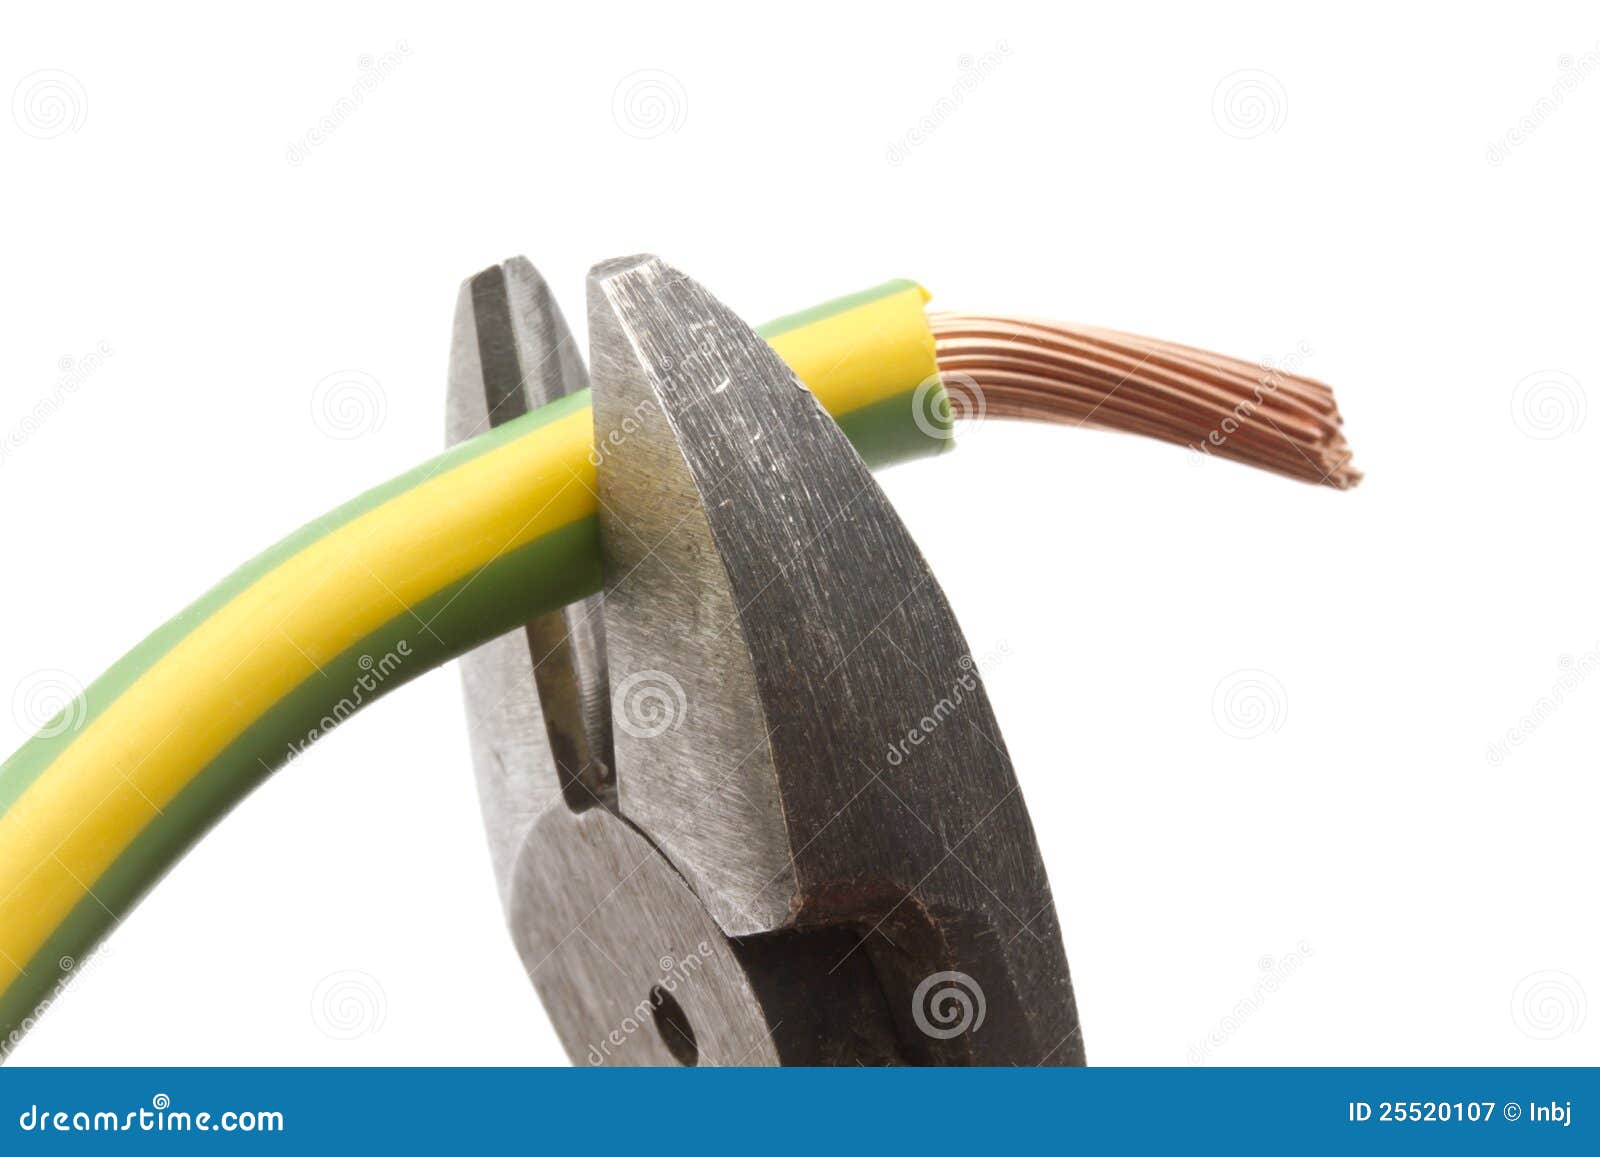 electrical wires and pliers